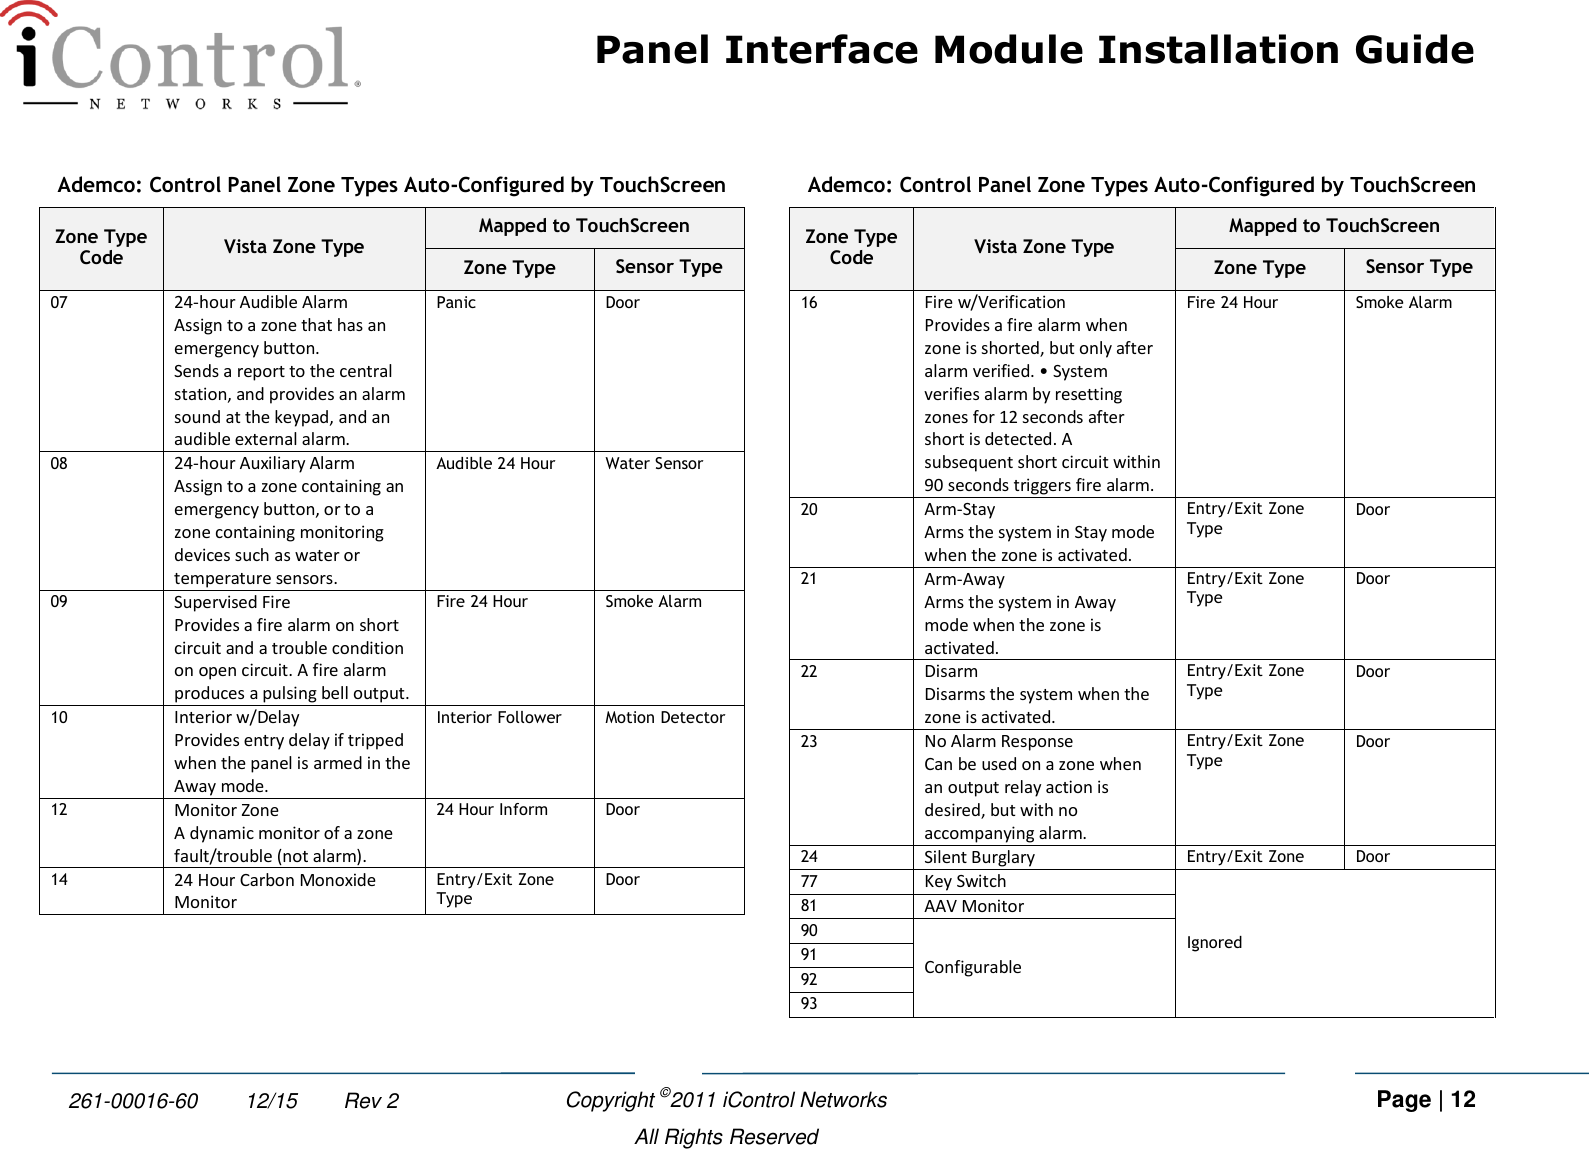 Panel Interface Module Installation Guide    Copyright ©2011 iControl Networks   Page | 12  All Rights Reserved 261-00016-60        12/15        Rev 2 Ademco: Control Panel Zone Types Auto-Configured by TouchScreen Zone Type Code Vista Zone Type Mapped to TouchScreen Zone Type Sensor Type 07 24-hour Audible Alarm Assign to a zone that has an emergency button. Sends a report to the central station, and provides an alarm sound at the keypad, and an audible external alarm. Panic Door 08 24-hour Auxiliary Alarm Assign to a zone containing an emergency button, or to a zone containing monitoring devices such as water or temperature sensors. Audible 24 Hour  Water Sensor 09 Supervised Fire Provides a fire alarm on short circuit and a trouble condition on open circuit. A fire alarm produces a pulsing bell output. Fire 24 Hour Smoke Alarm 10 Interior w/Delay Provides entry delay if tripped when the panel is armed in the Away mode. Interior Follower  Motion Detector 12 Monitor Zone A dynamic monitor of a zone fault/trouble (not alarm).  24 Hour Inform Door 14 24 Hour Carbon Monoxide Monitor Entry/Exit Zone Type Door Ademco: Control Panel Zone Types Auto-Configured by TouchScreen Zone Type Code Vista Zone Type Mapped to TouchScreen Zone Type Sensor Type 16 Fire w/Verification Provides a fire alarm when zone is shorted, but only after alarm verified. • System verifies alarm by resetting zones for 12 seconds after short is detected. A subsequent short circuit within 90 seconds triggers fire alarm. Fire 24 Hour Smoke Alarm 20 Arm-Stay  Arms the system in Stay mode when the zone is activated. Entry/Exit Zone Type Door 21 Arm-Away Arms the system in Away mode when the zone is activated. Entry/Exit Zone Type Door 22 Disarm Disarms the system when the zone is activated. Entry/Exit Zone Type Door 23 No Alarm Response  Can be used on a zone when an output relay action is desired, but with no accompanying alarm. Entry/Exit Zone Type Door 24 Silent Burglary Entry/Exit Zone Door 77 Key Switch Ignored 81 AAV Monitor 90 Configurable 91 92 93 